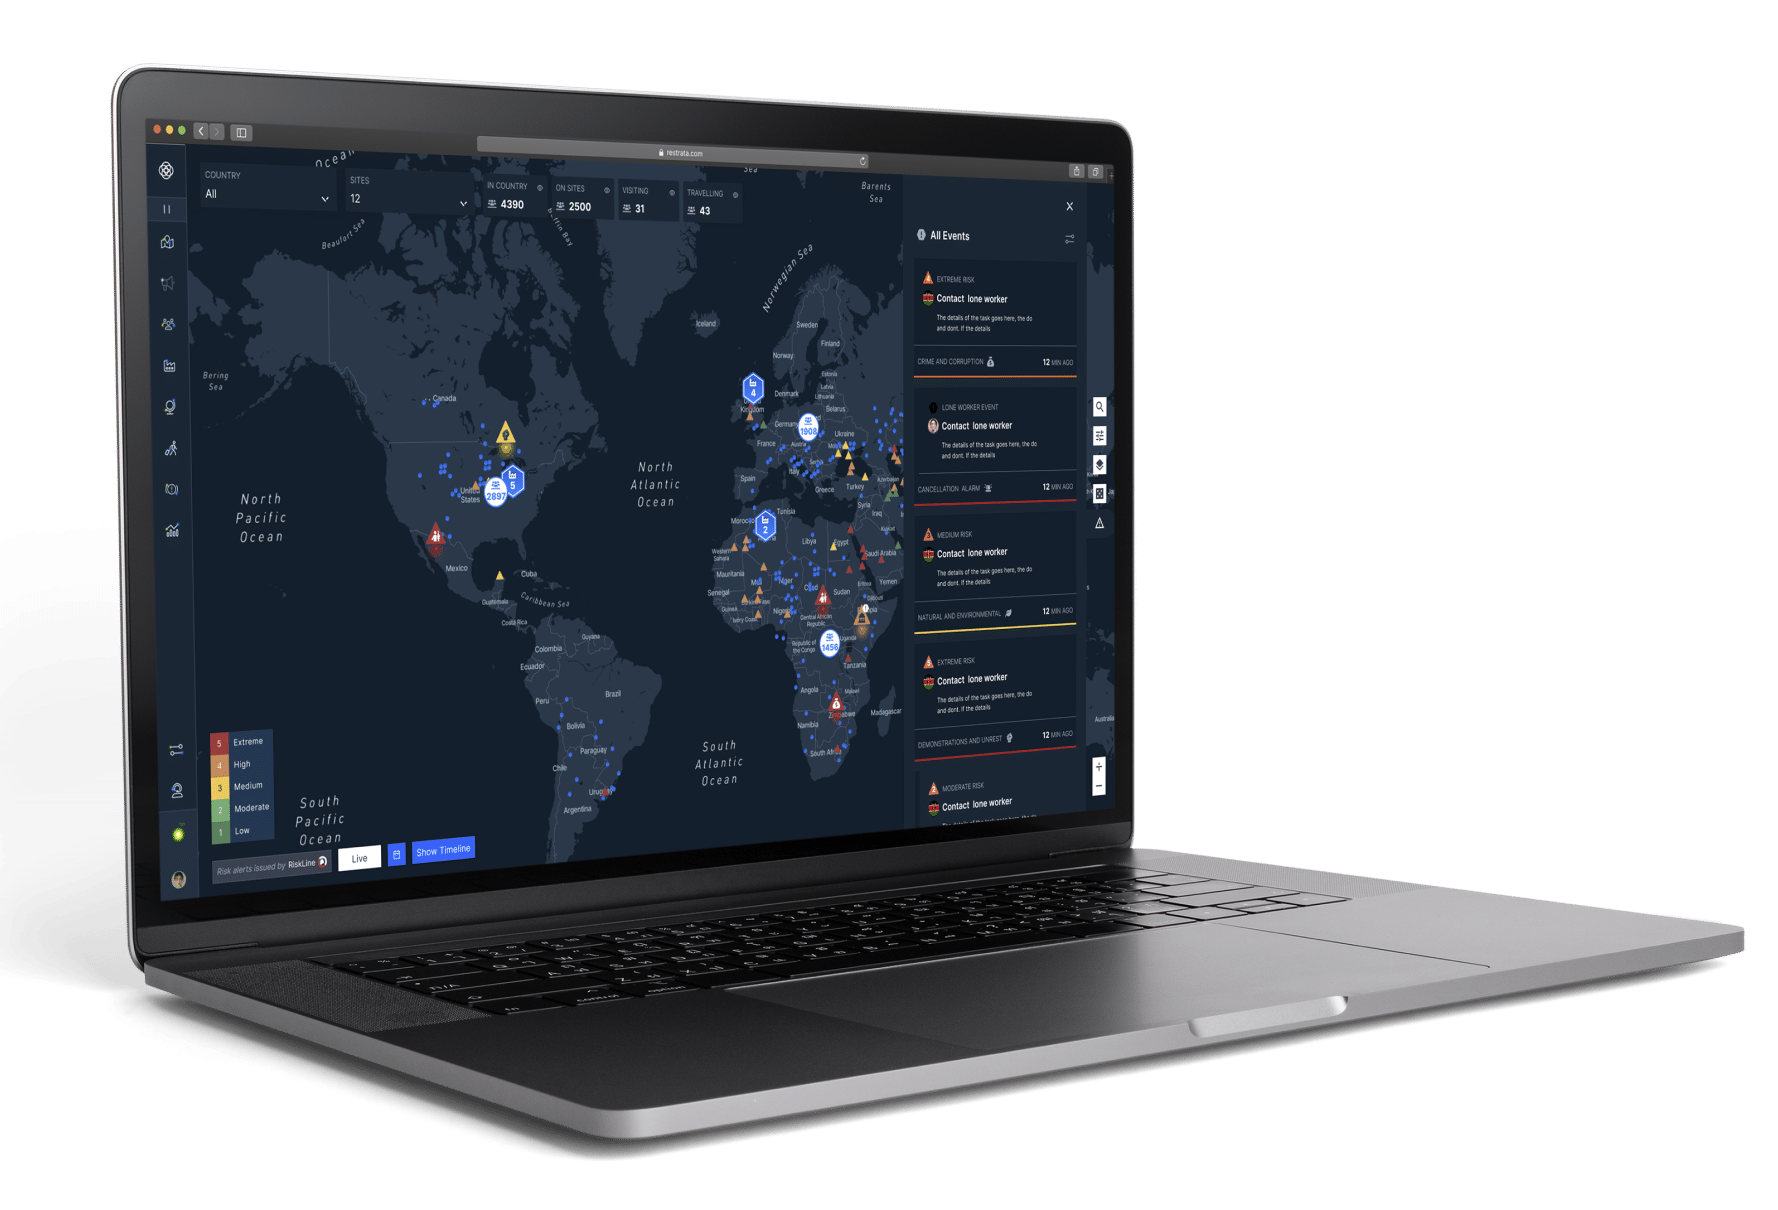 Laptop open with the Restrata platform displaying a map of the world highlighting risk events